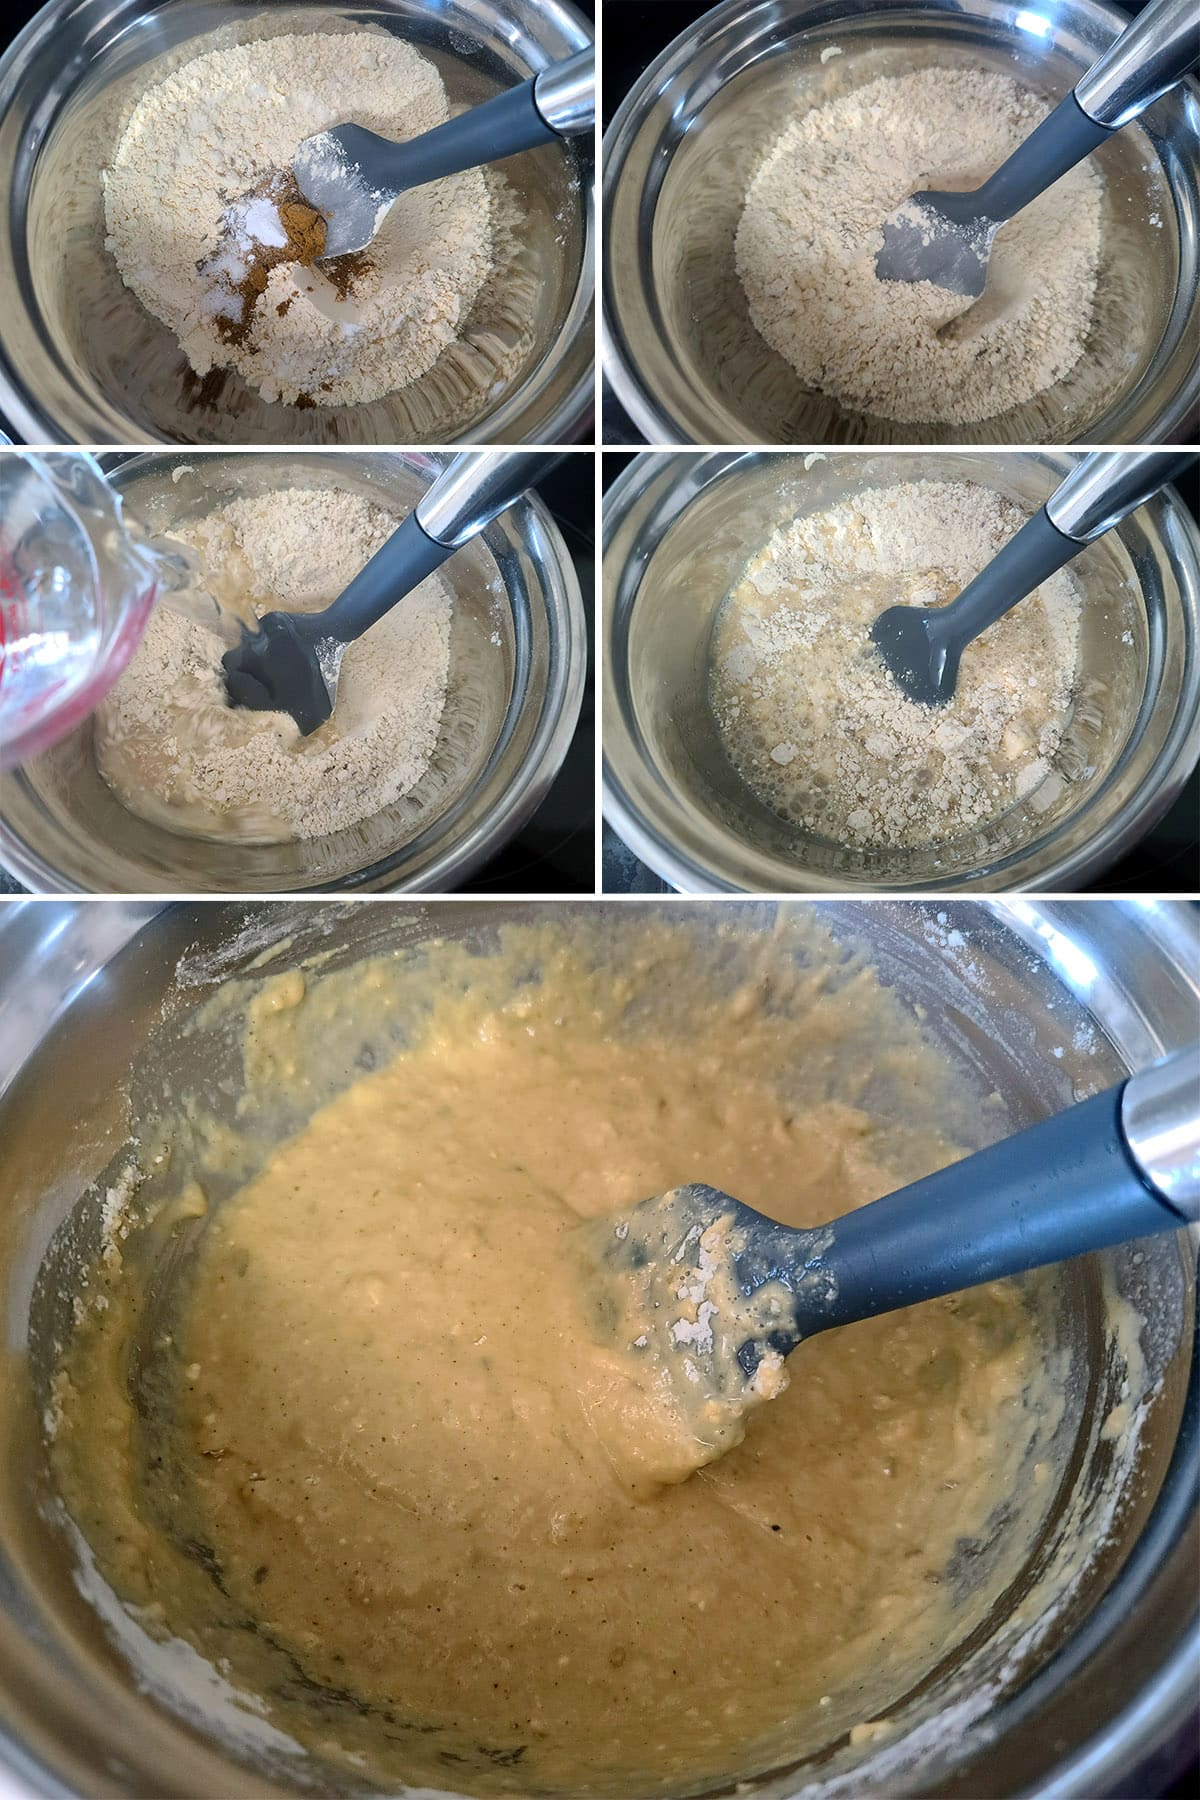 A 5 part image showing the batter being mixed.